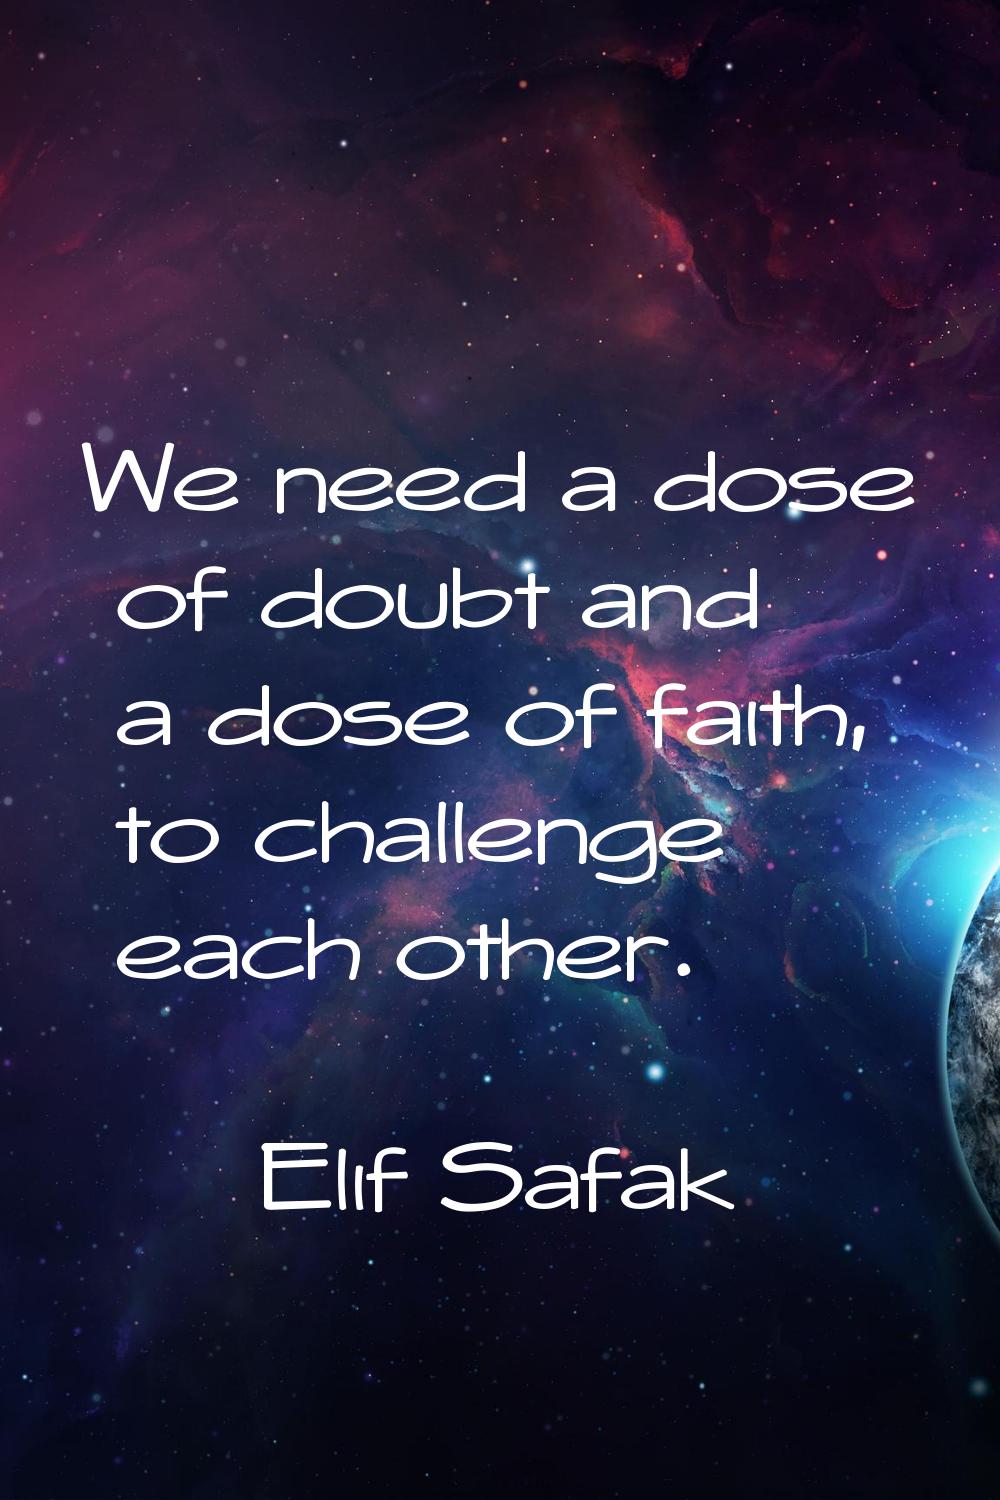 We need a dose of doubt and a dose of faith, to challenge each other.